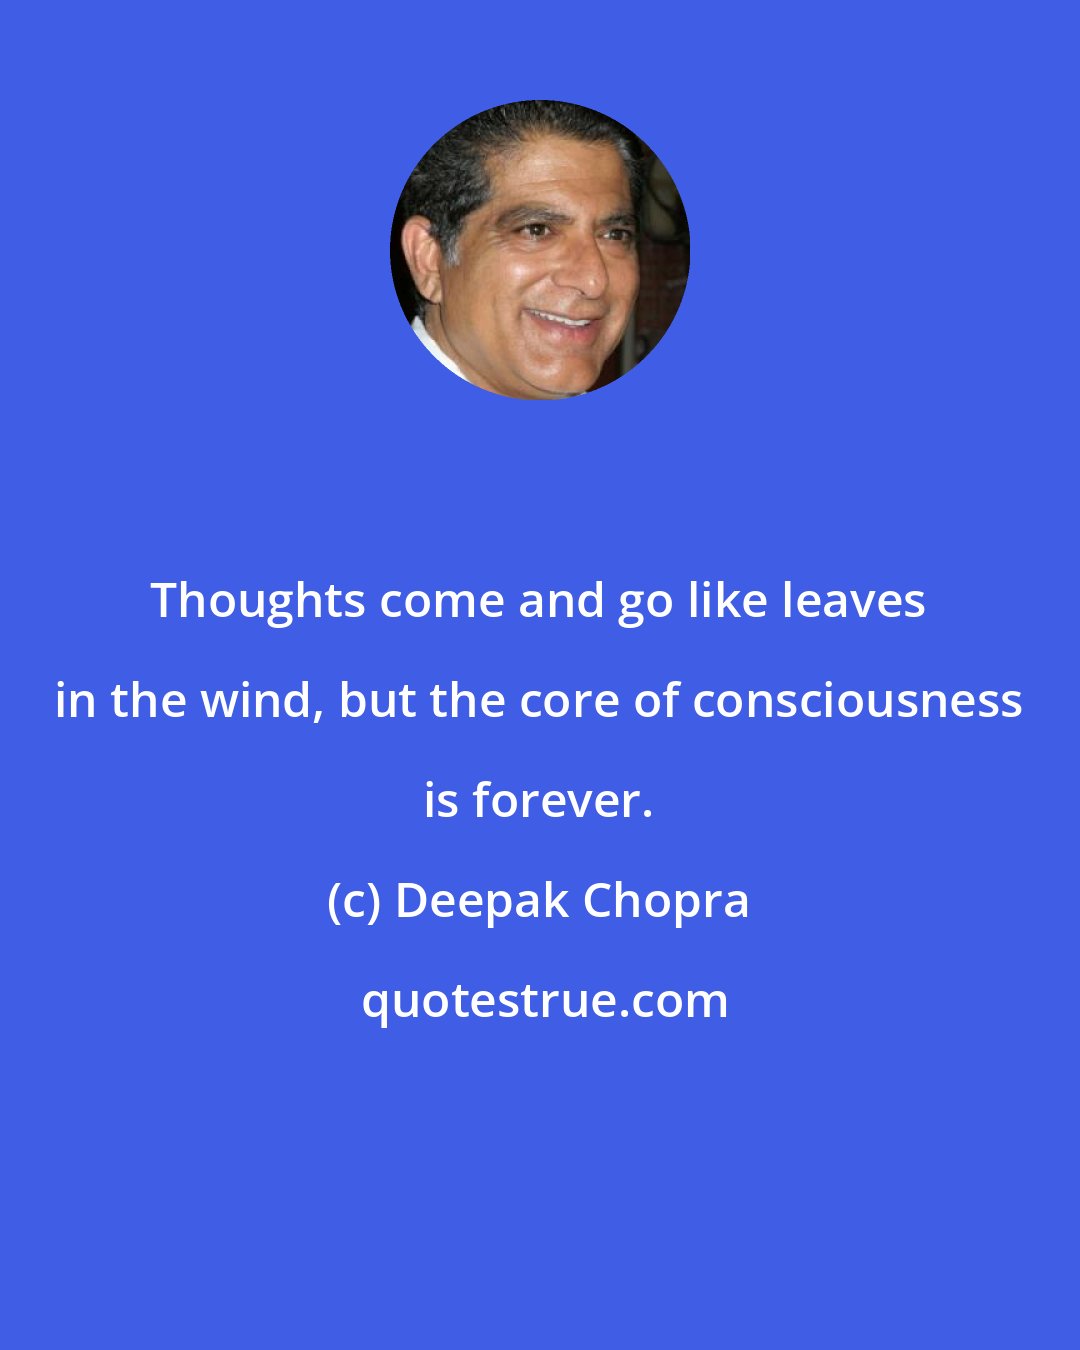 Deepak Chopra: Thoughts come and go like leaves in the wind, but the core of consciousness is forever.